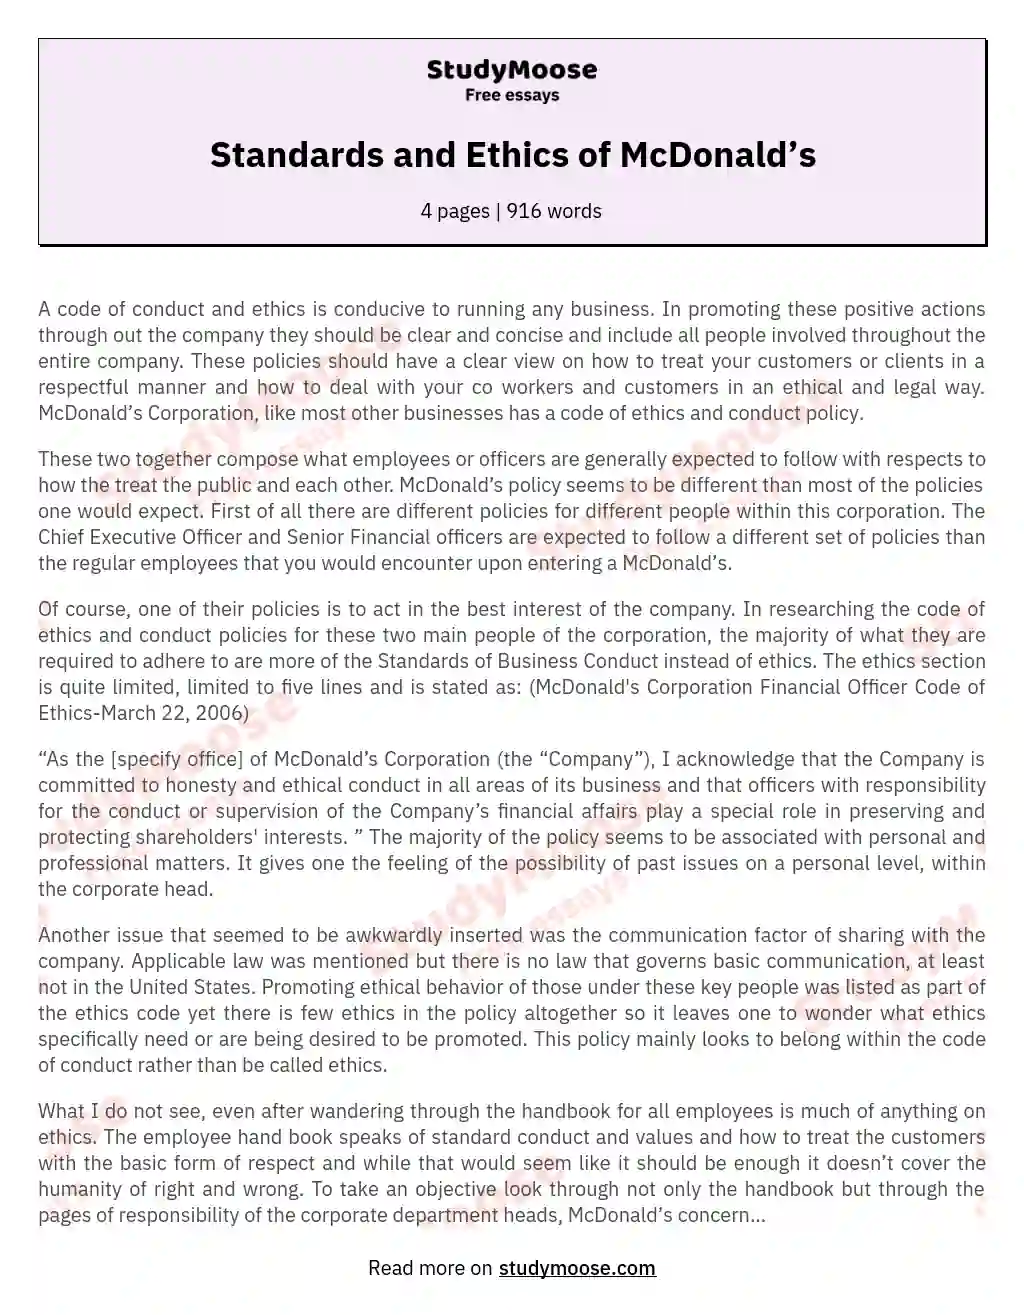 Standards and Ethics of McDonald’s essay